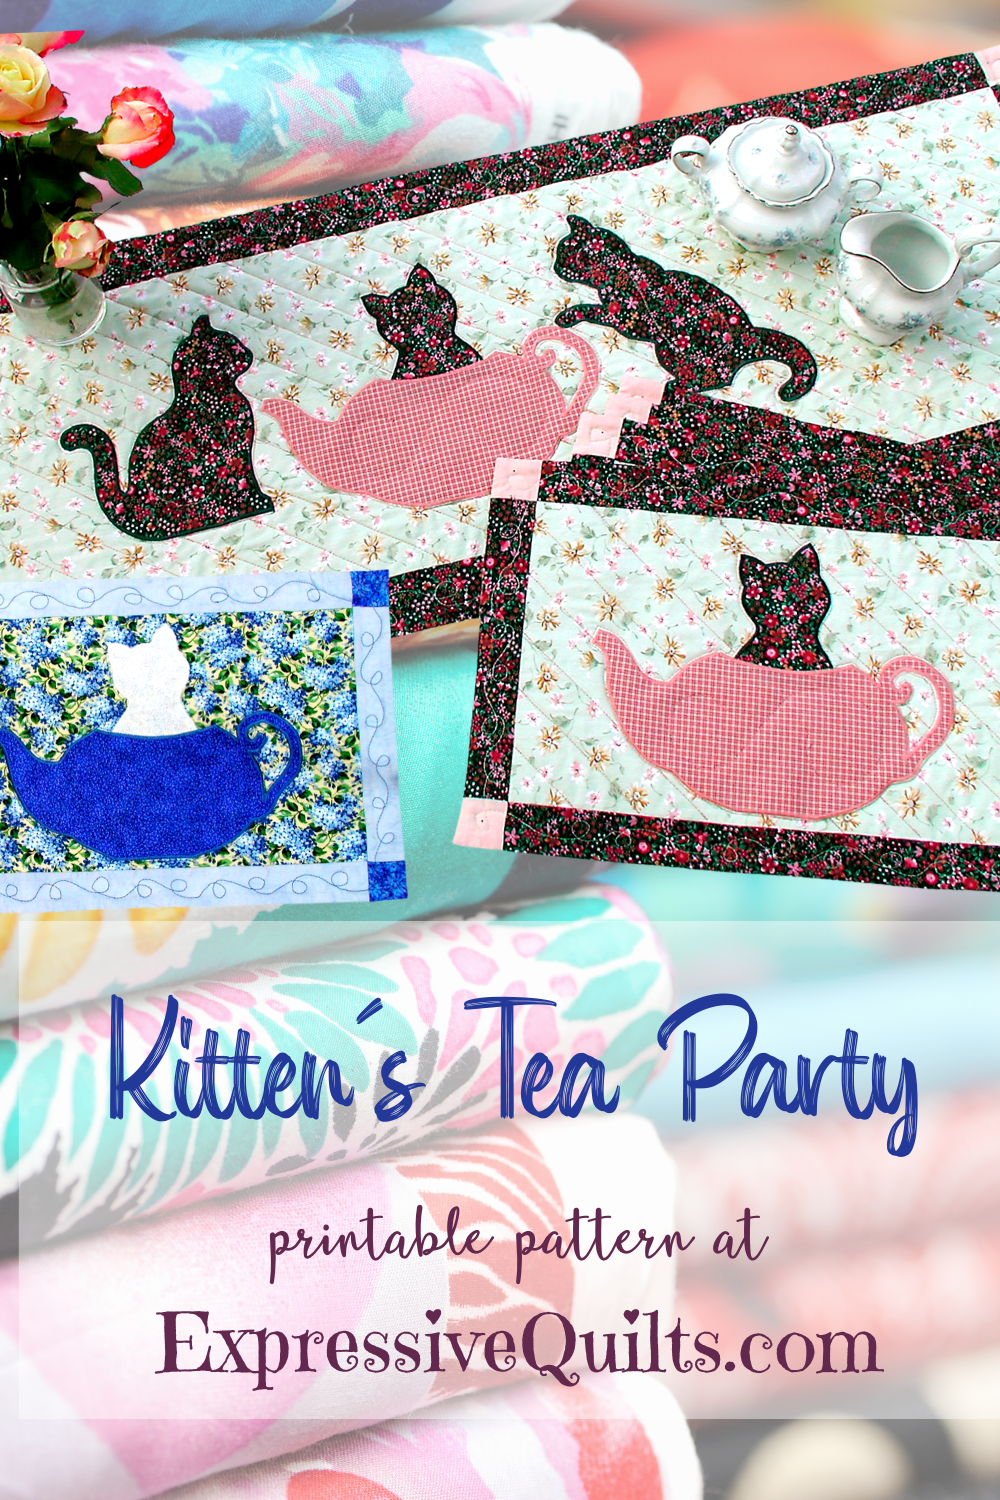 Kittens Tea Party is a Quilt Pattern digital download - for table runner and placemats